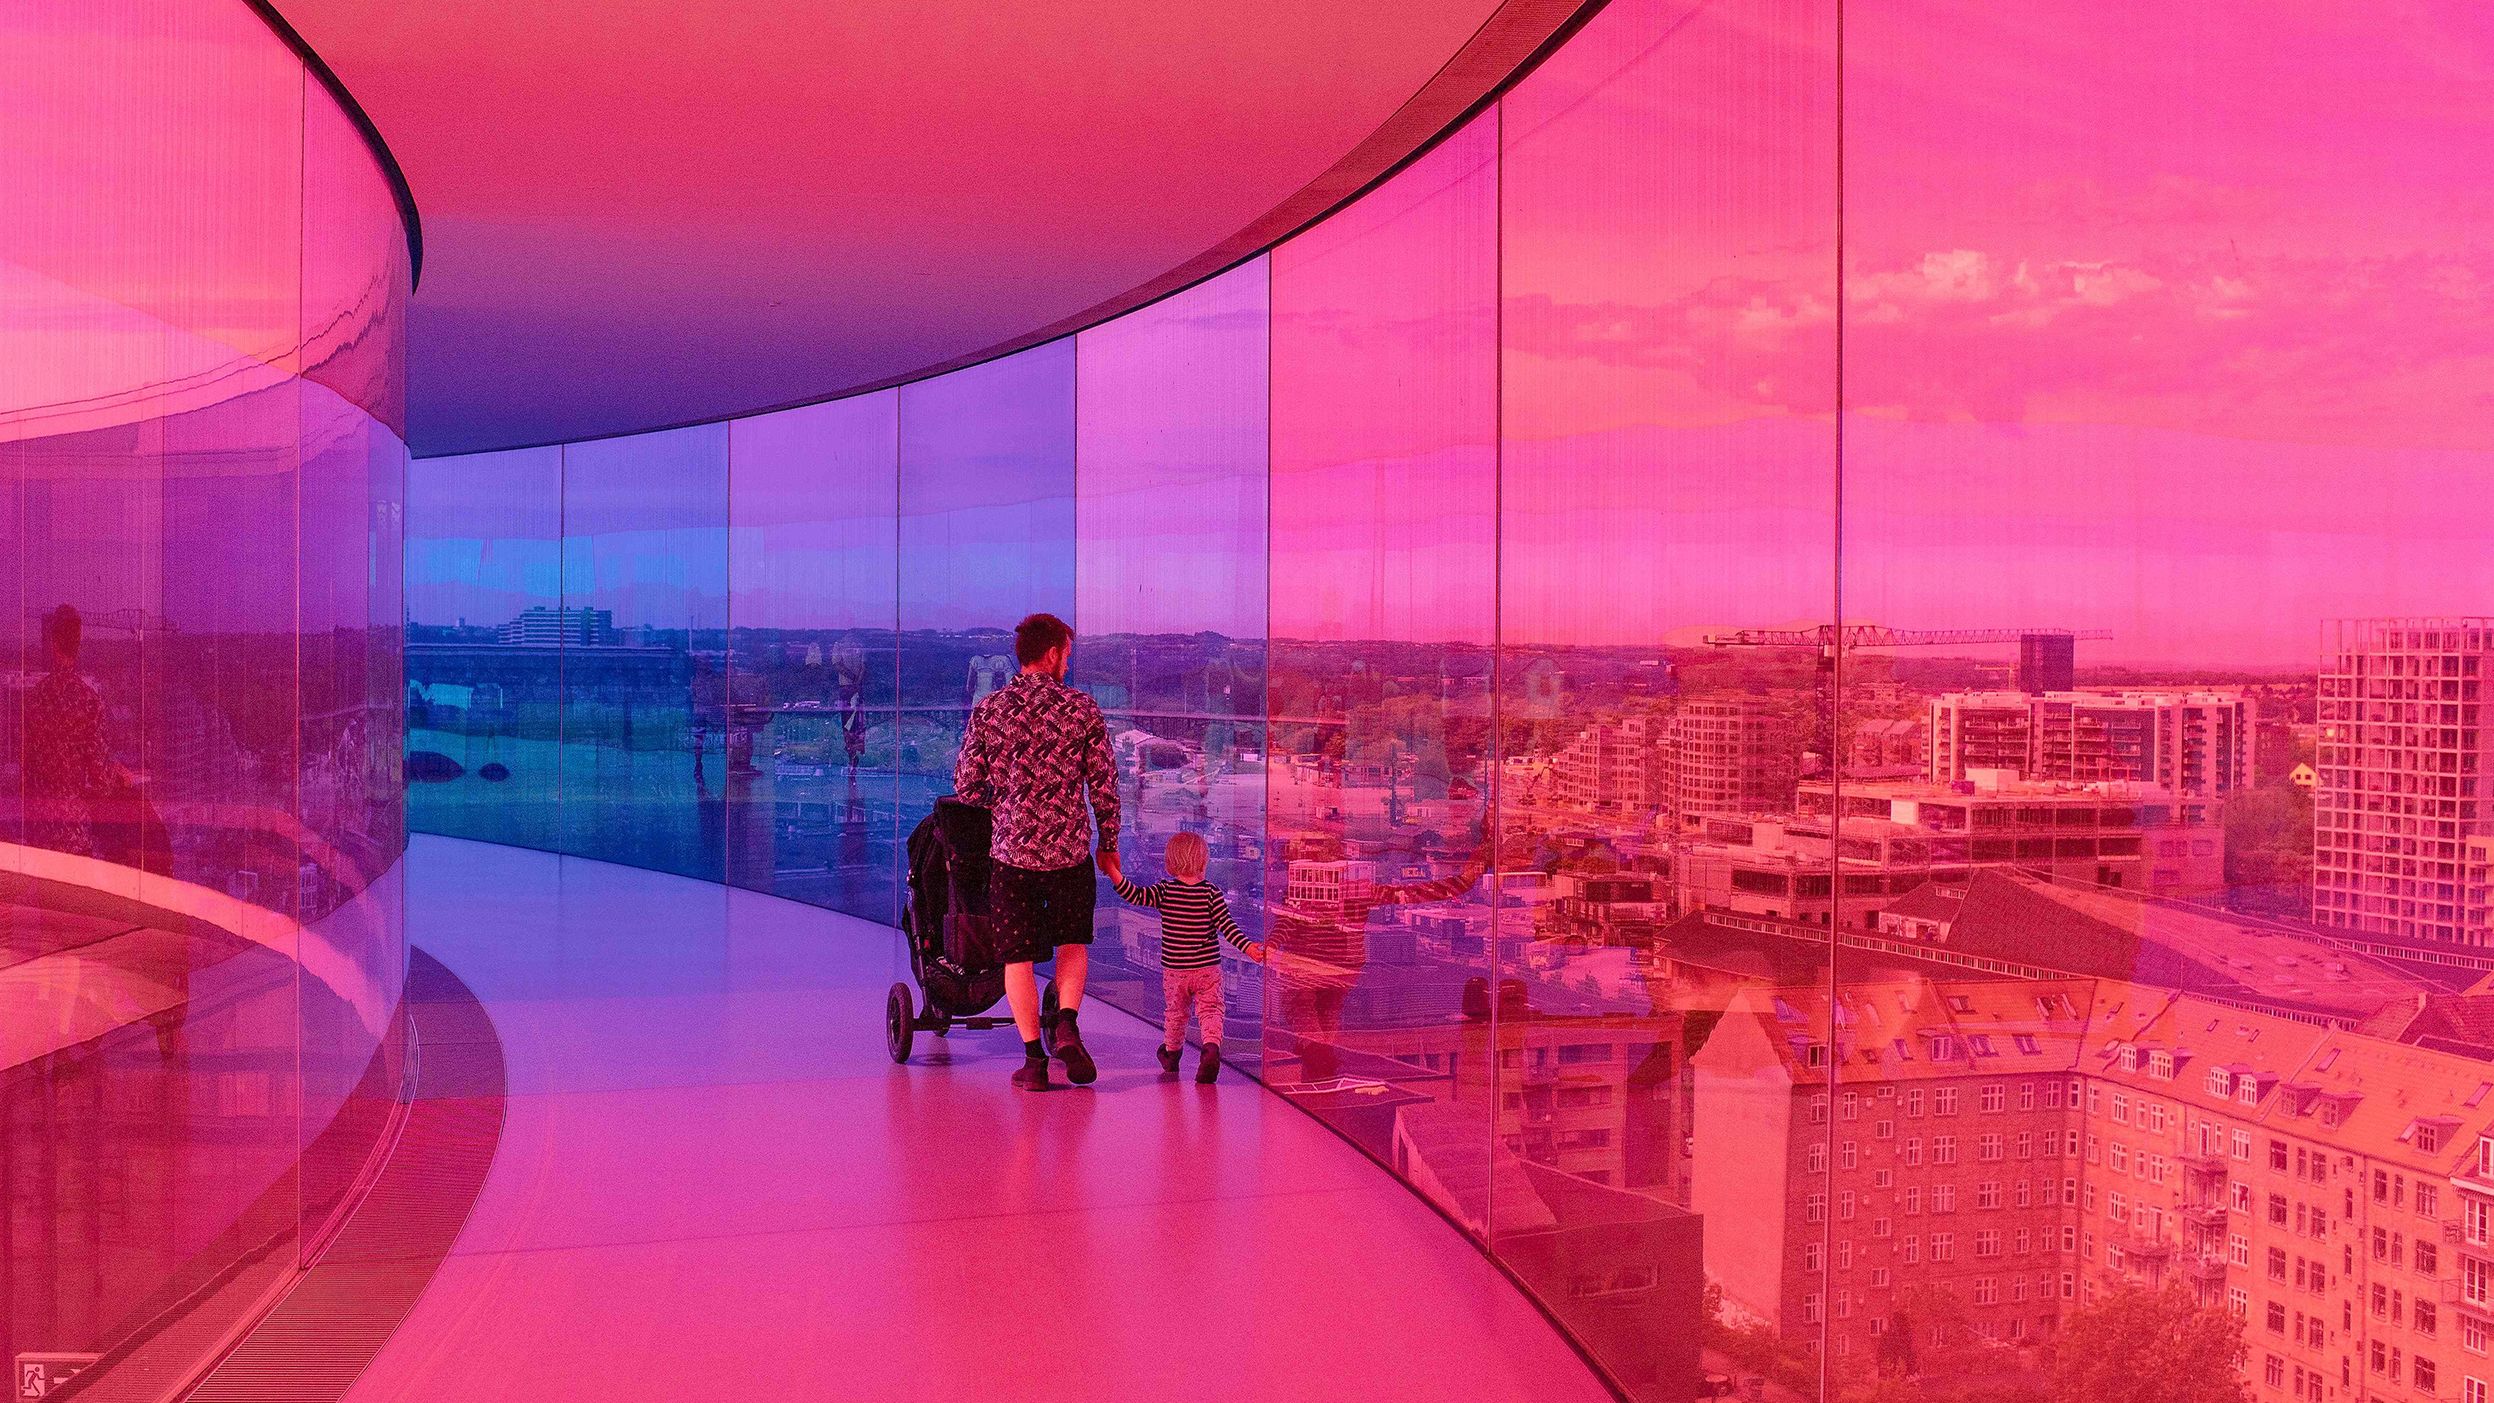 People visit the ARoS Museum of Art in Aarhus, Denmark, on May 22. The museum opened its doors to the public after being closed for two months.